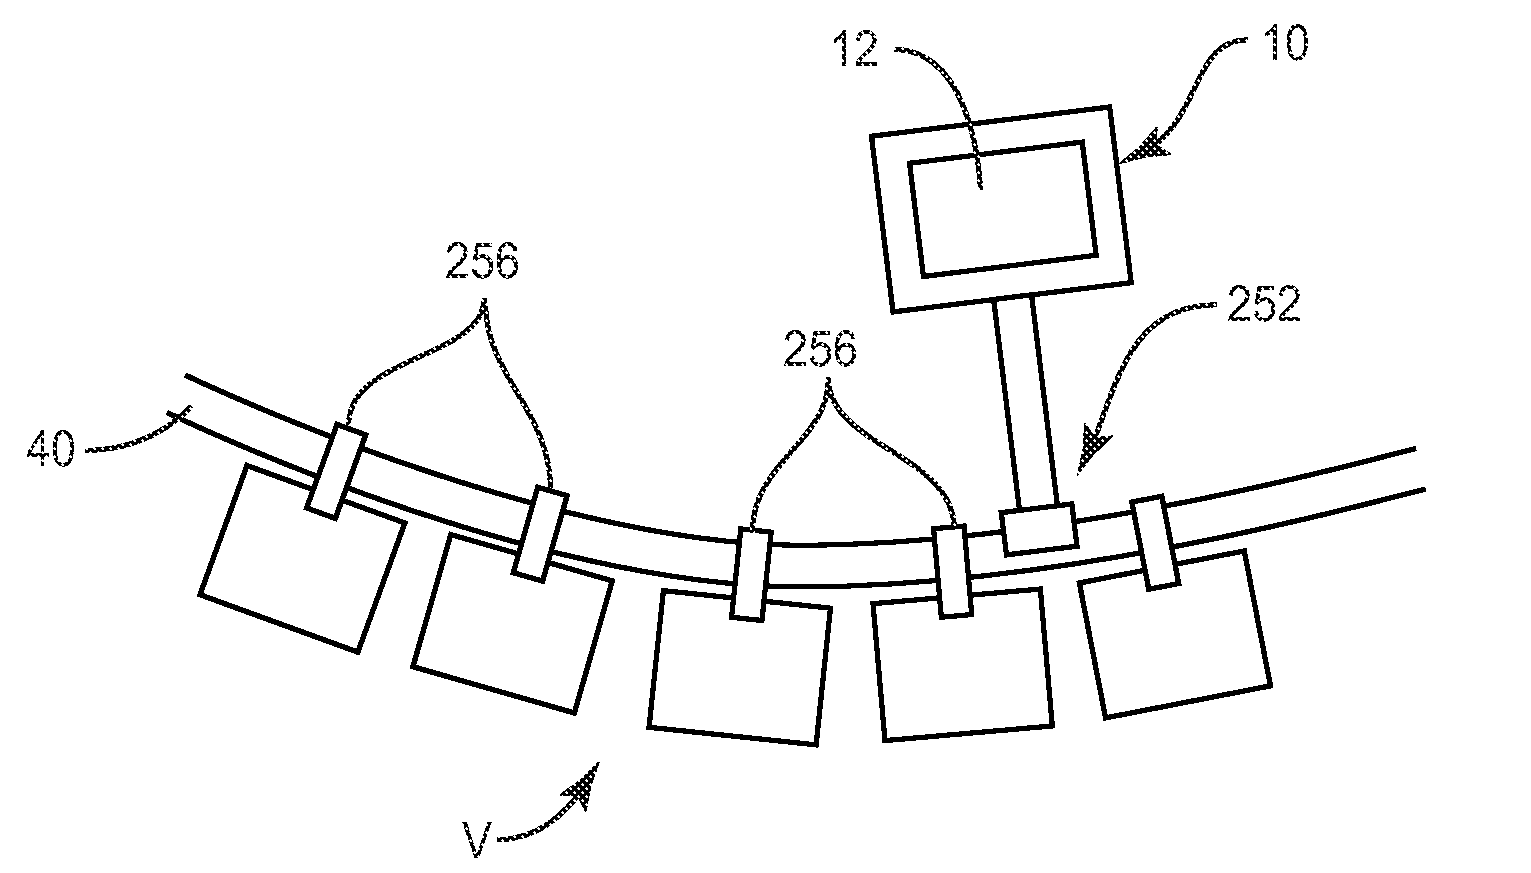 Spinal implant measuring system and method